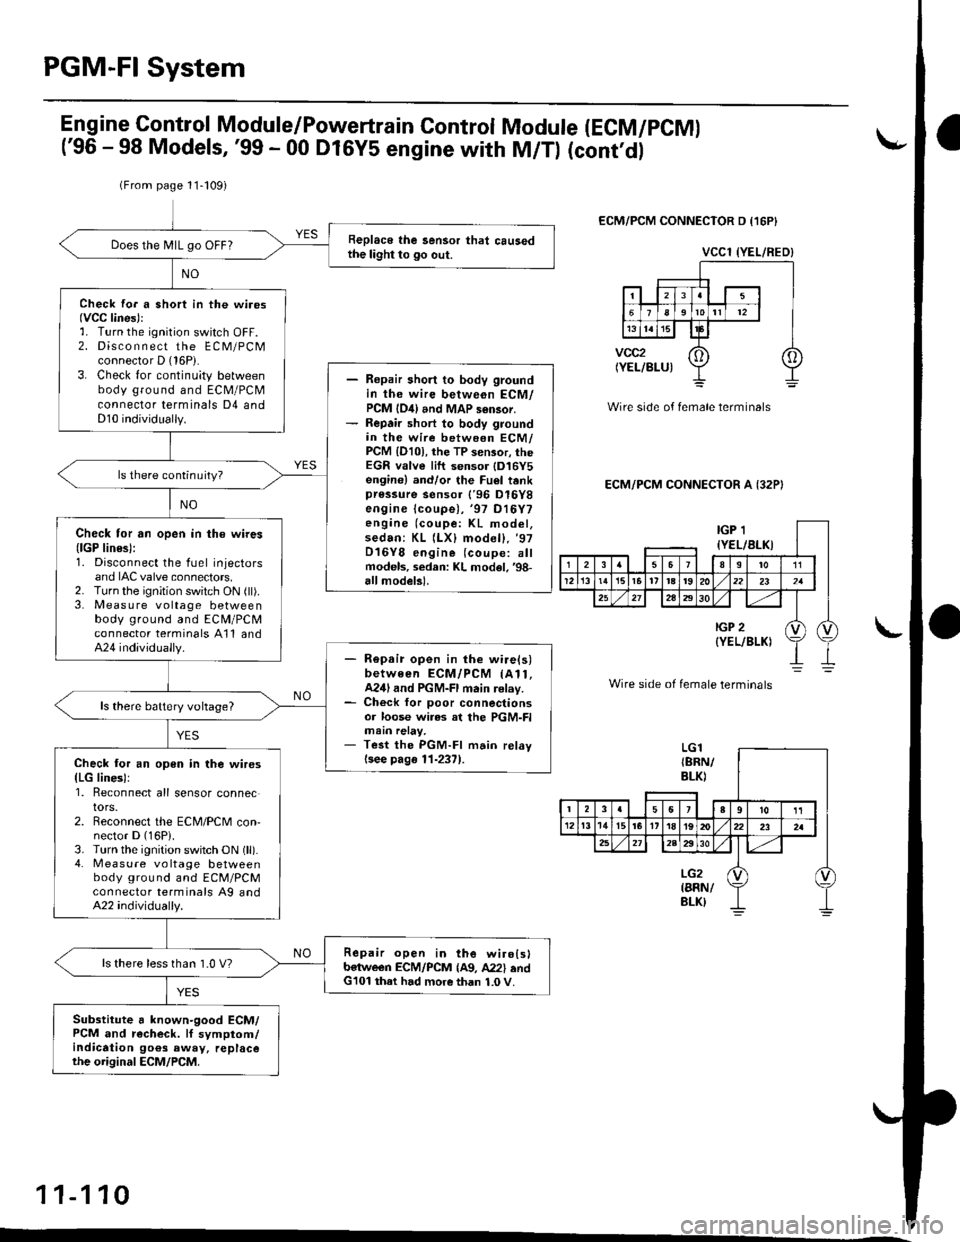 HONDA CIVIC 1998 6.G User Guide PGM-FI System
(From page 11-109)
Replace the sensor that causedthe light to go out.Does the N4lL go OFF?
Check fo. a short in the wi.os(VCC lines)::. Turn the ignition switch OFF.2. Disco n n ect the